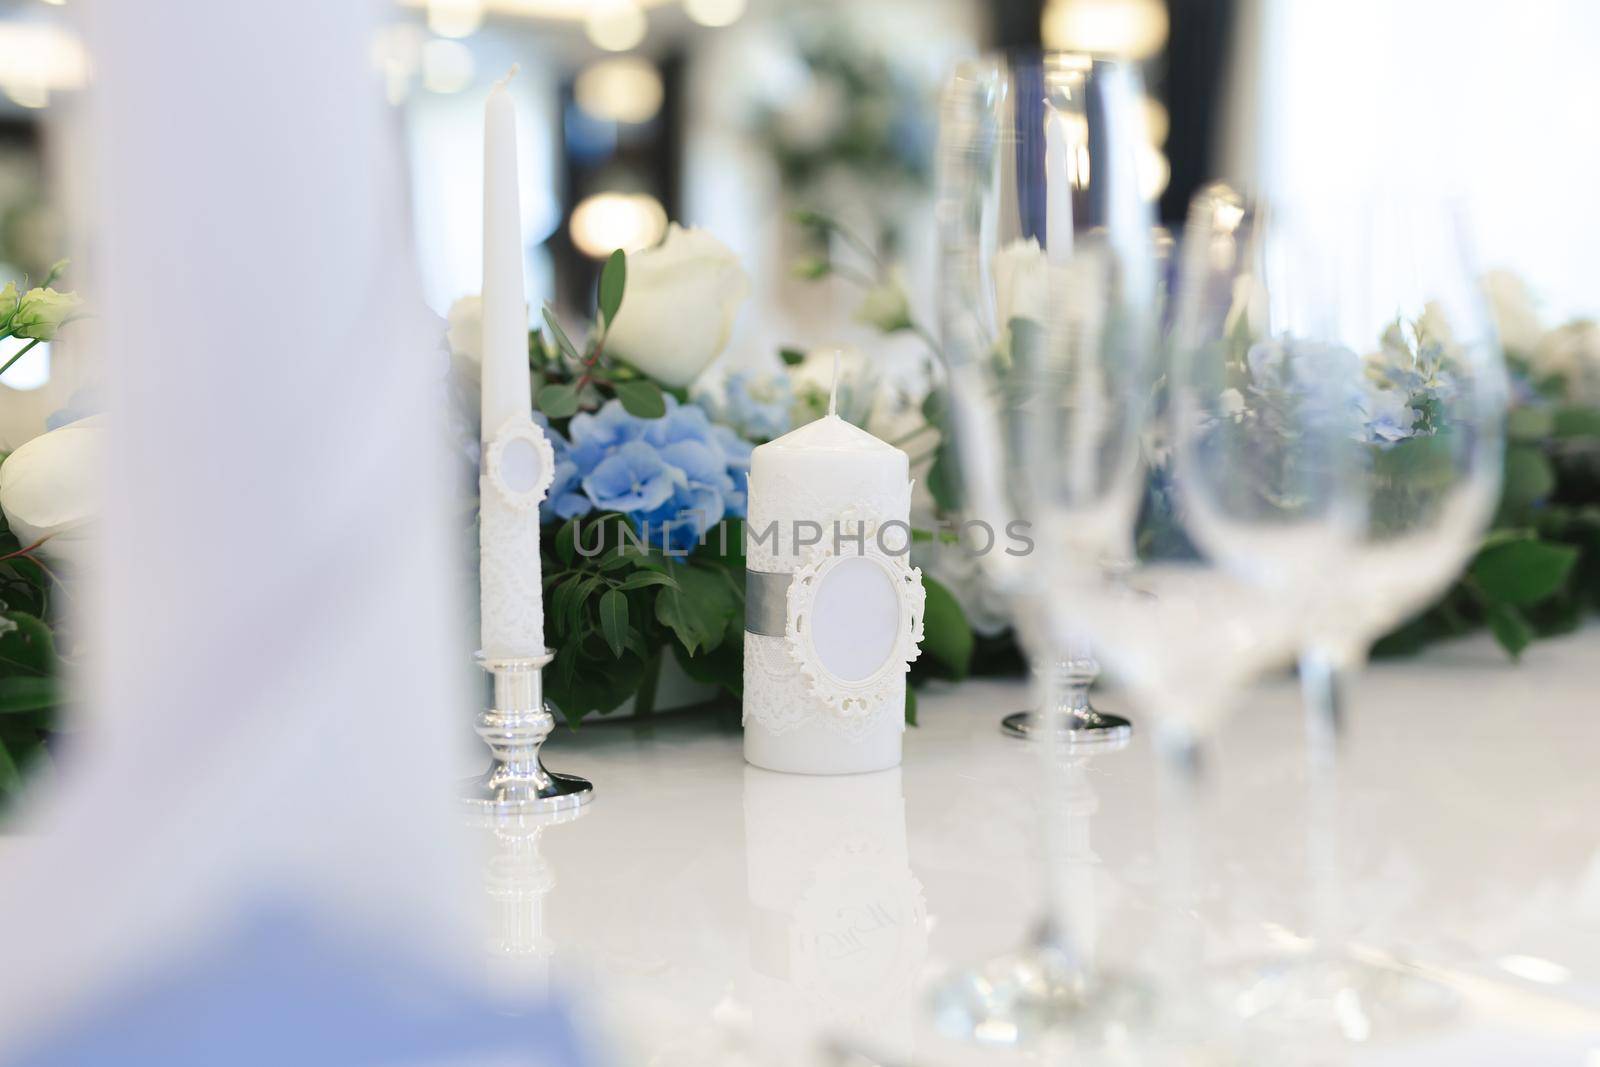 Wedding decor at the banquet. Flowers and candles with the initials of the bride and groom by StudioPeace